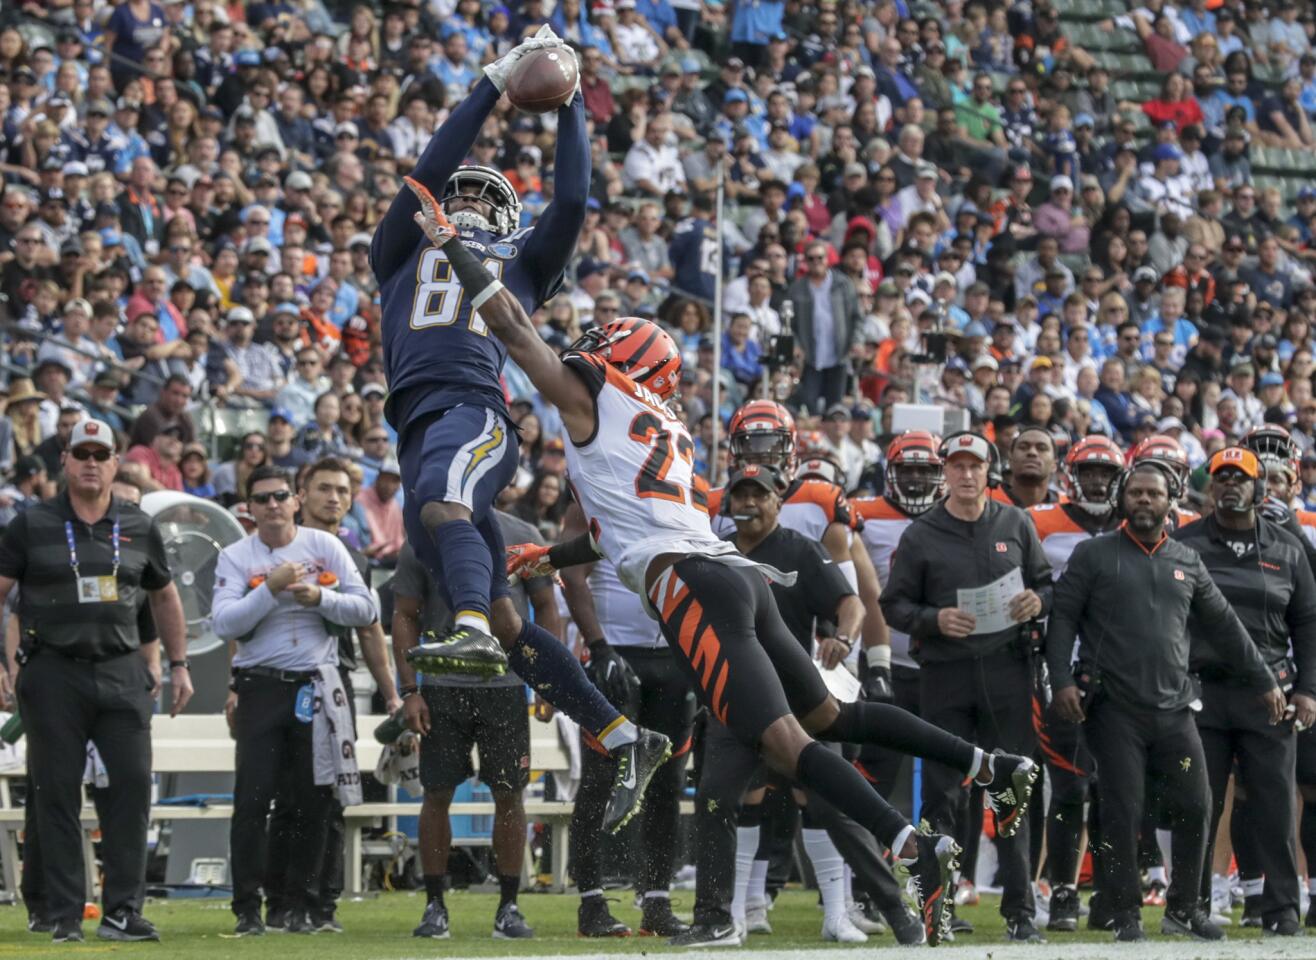 Chargers receiver Mike Williams reaches high for a pass over Bengals defensive back William Jackson, but the play was called incomplete because the ball hit the ground upon Williams landing.